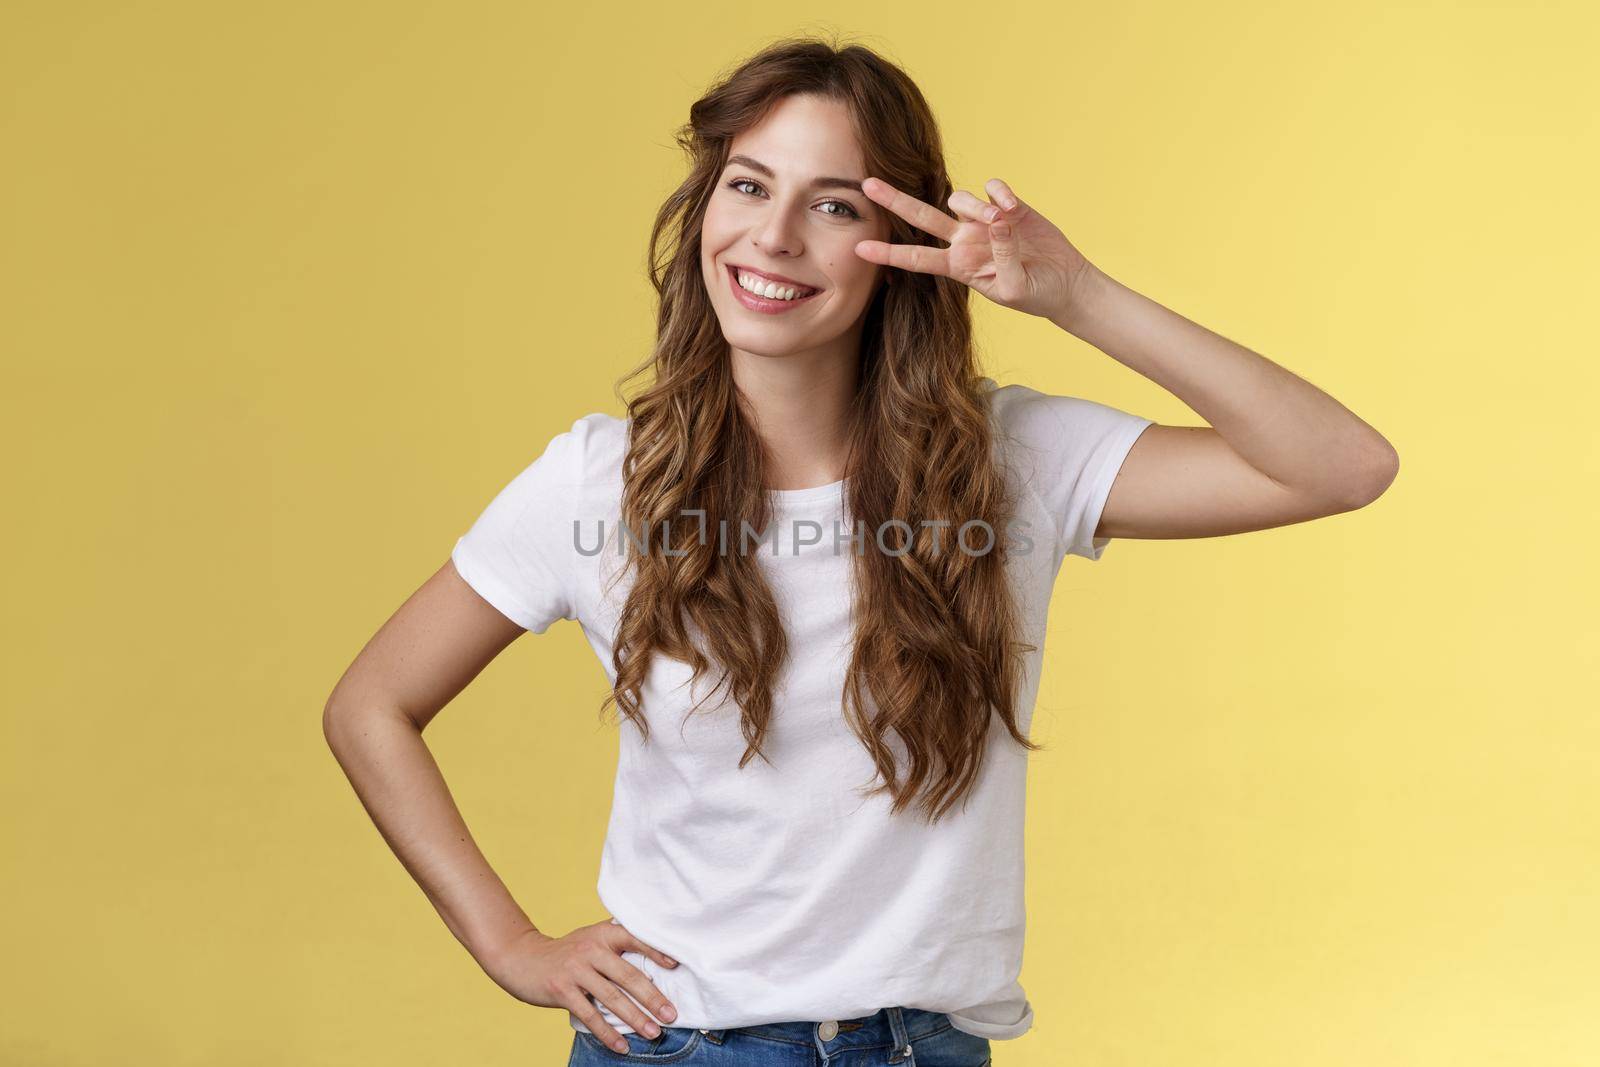 Positive outgoing enthusiastic good-looking woman having fun enjoy weekend summer vacation travel show peace sign victory gesture on eye tilt head having fun smiling broadly yellow background. Lifestyle.